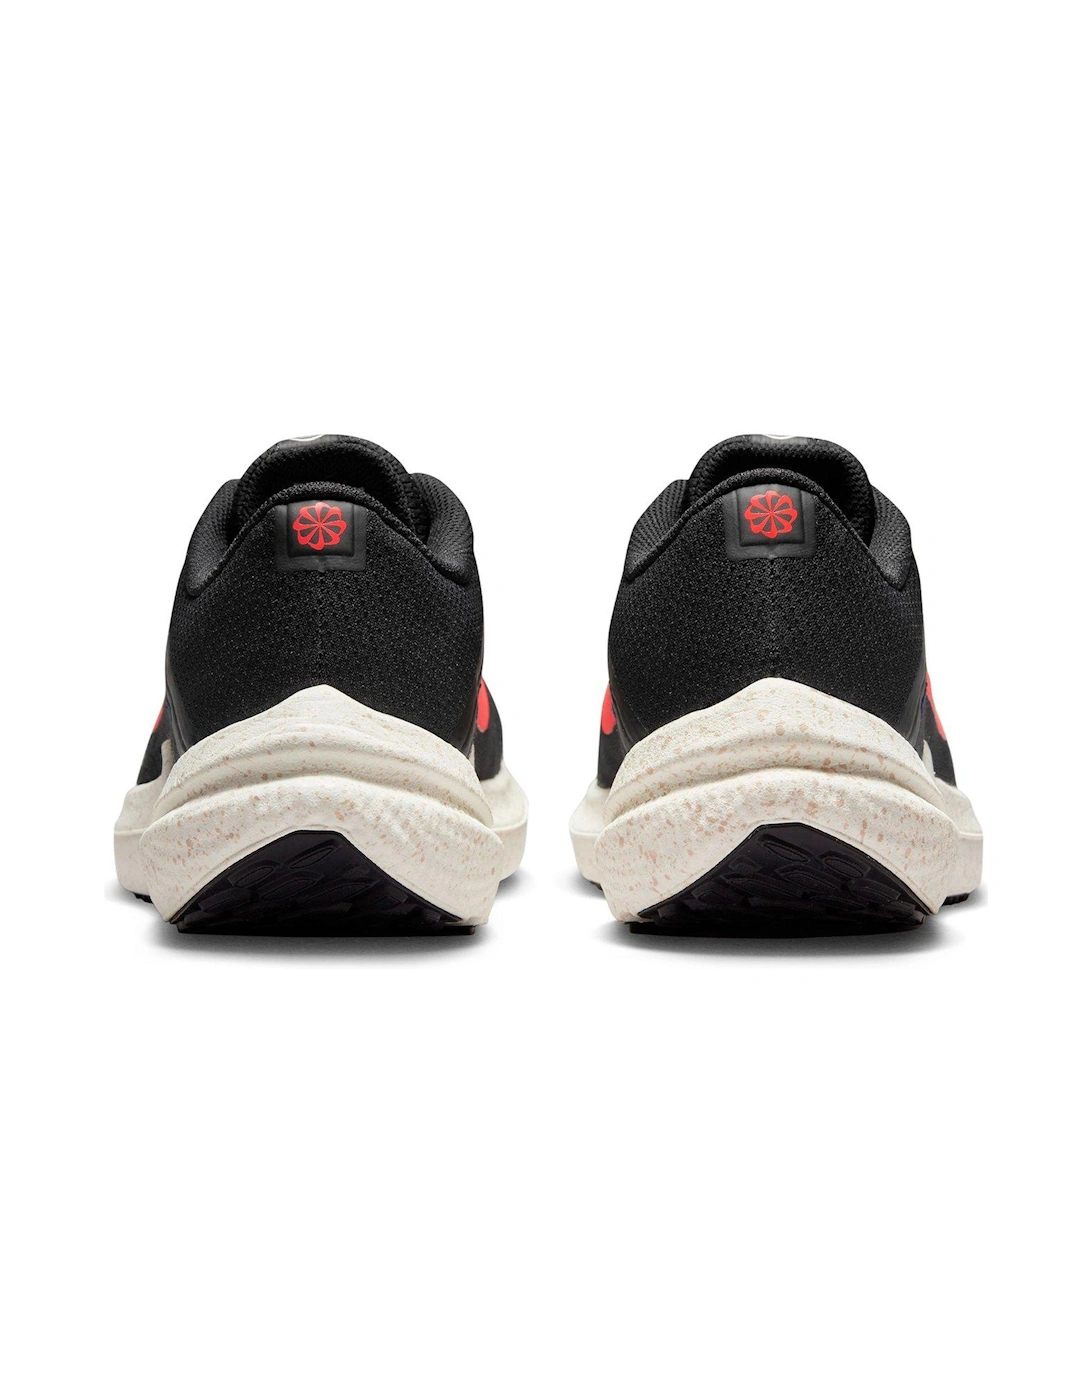 Air Winflo 10 Trainers - Black/Red